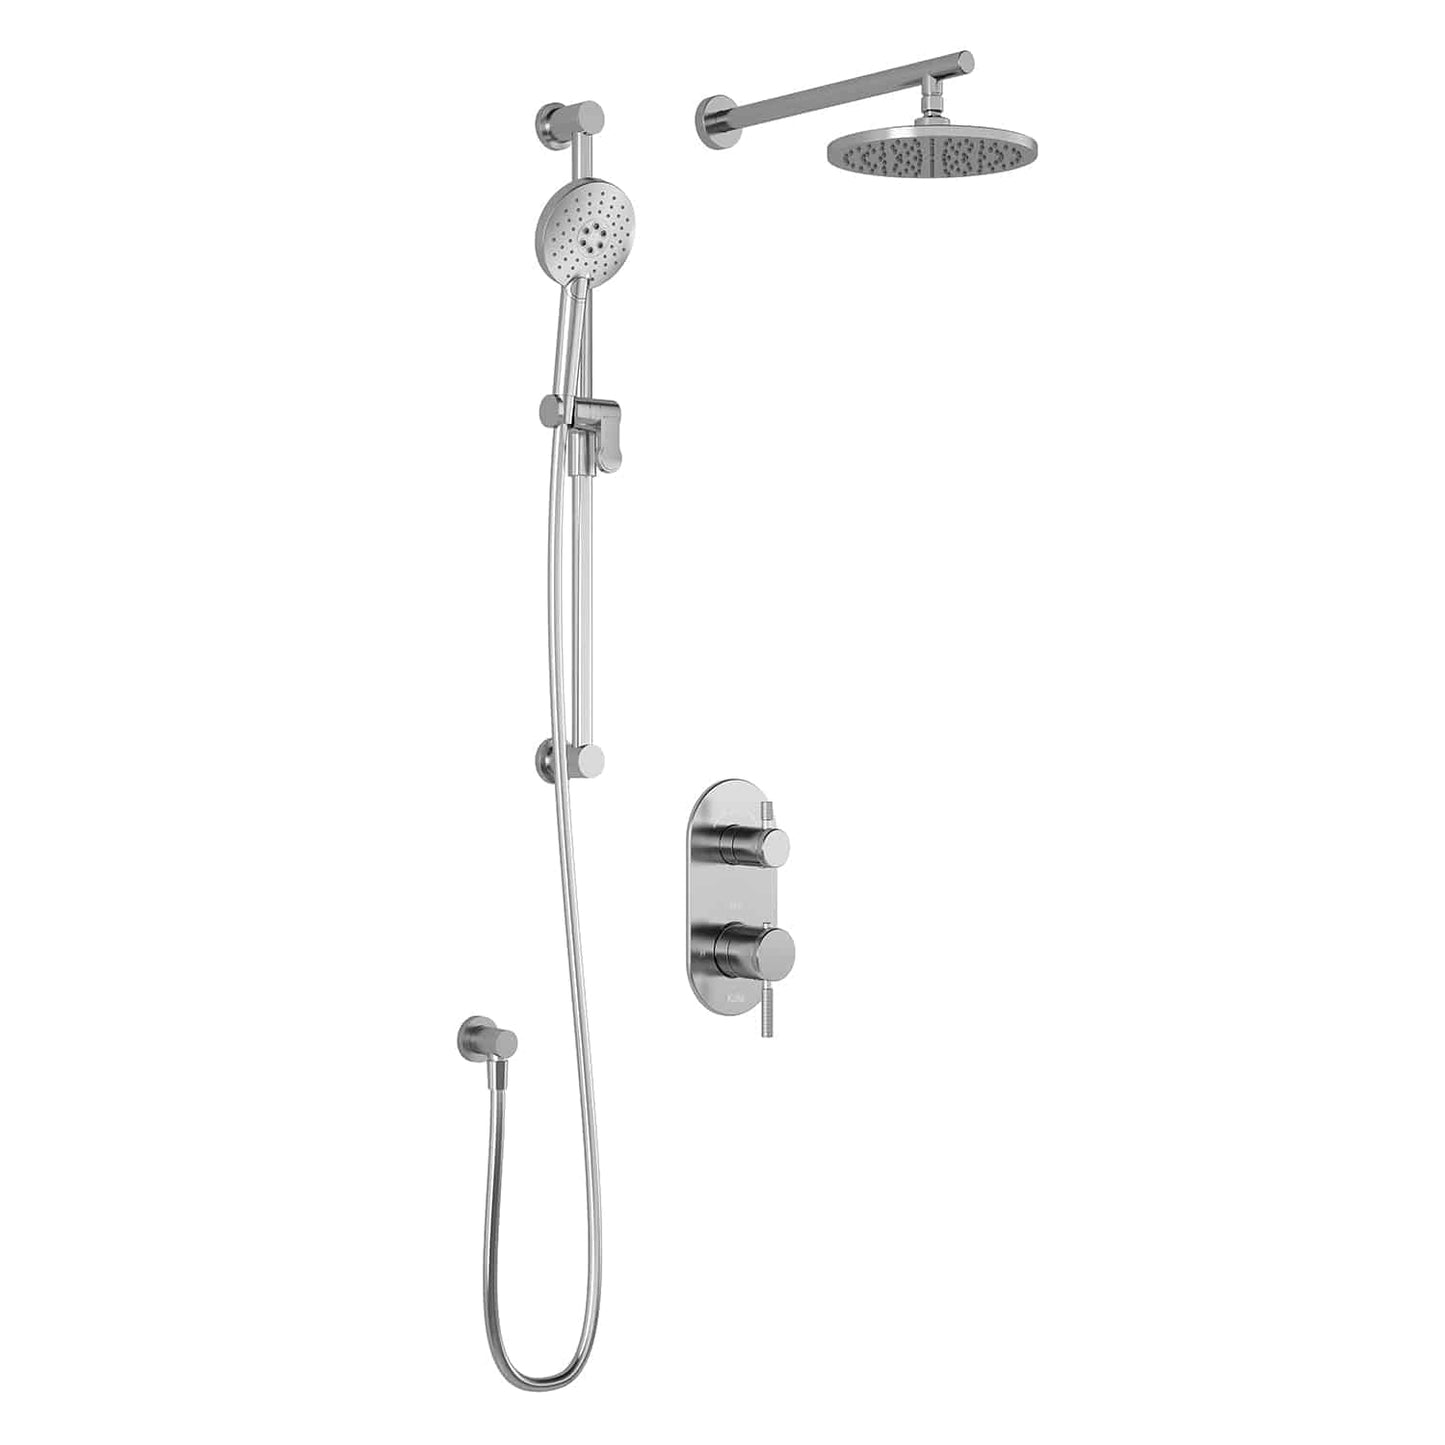 Kalia PRECISO TD2 (Valve Not Included) AQUATONIK T/P with Diverter Shower System with 9" Round Shower Head, Round Hand Shower and Wall Arm -Chrome